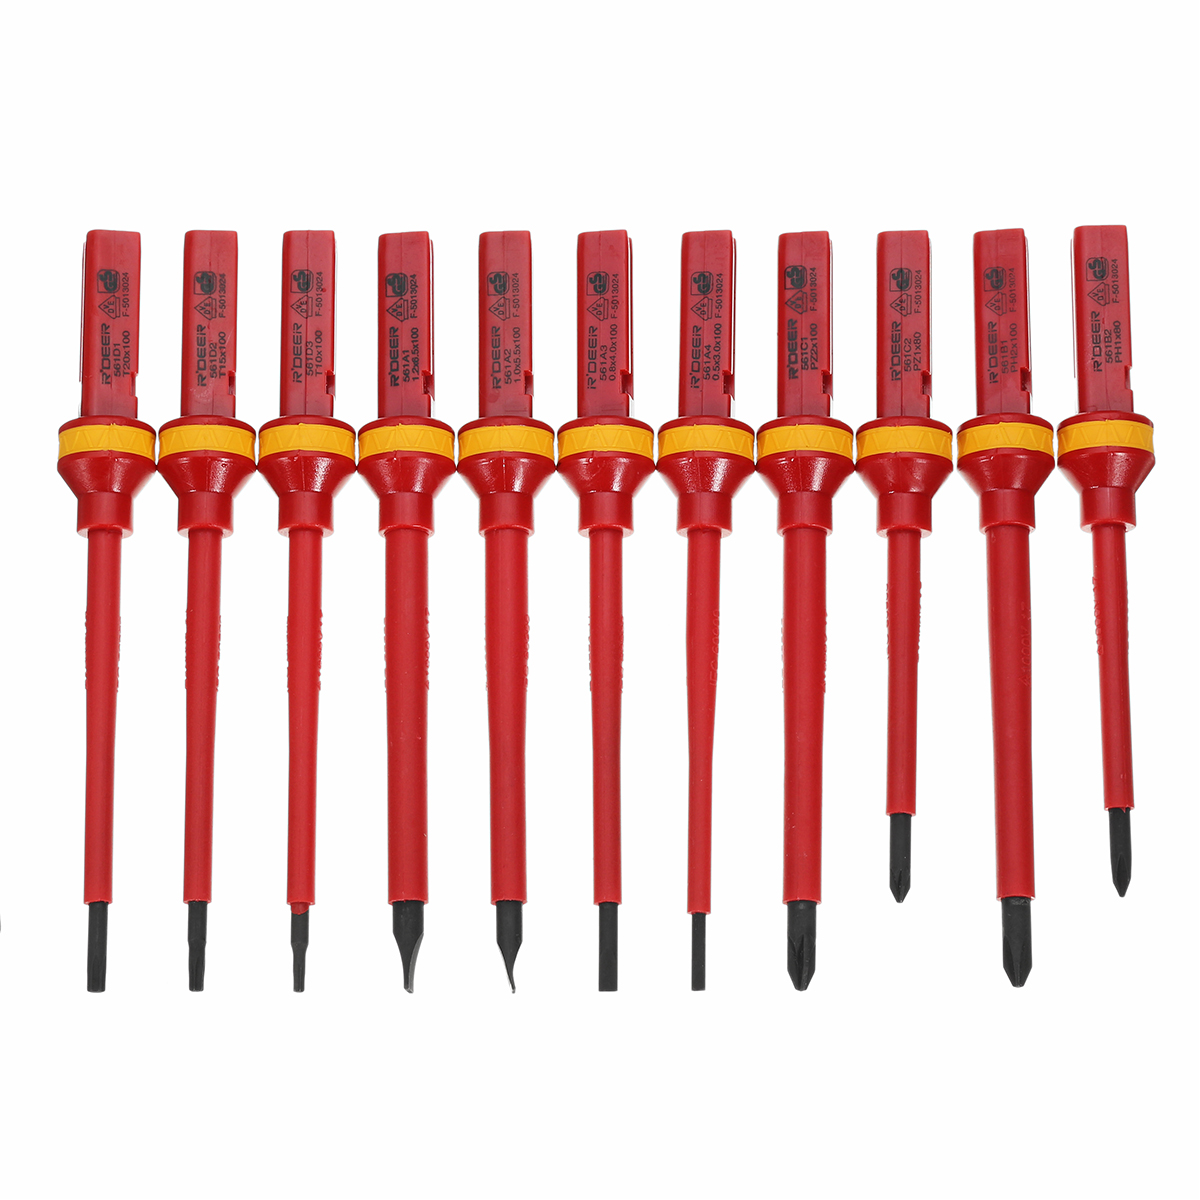 13Pcs-1000V-Electronic-Insulated-Screwdriver-Set-Phillips-Slotted-Torx-CR-V-Screwdriver-Hand-Tools-1224521-7